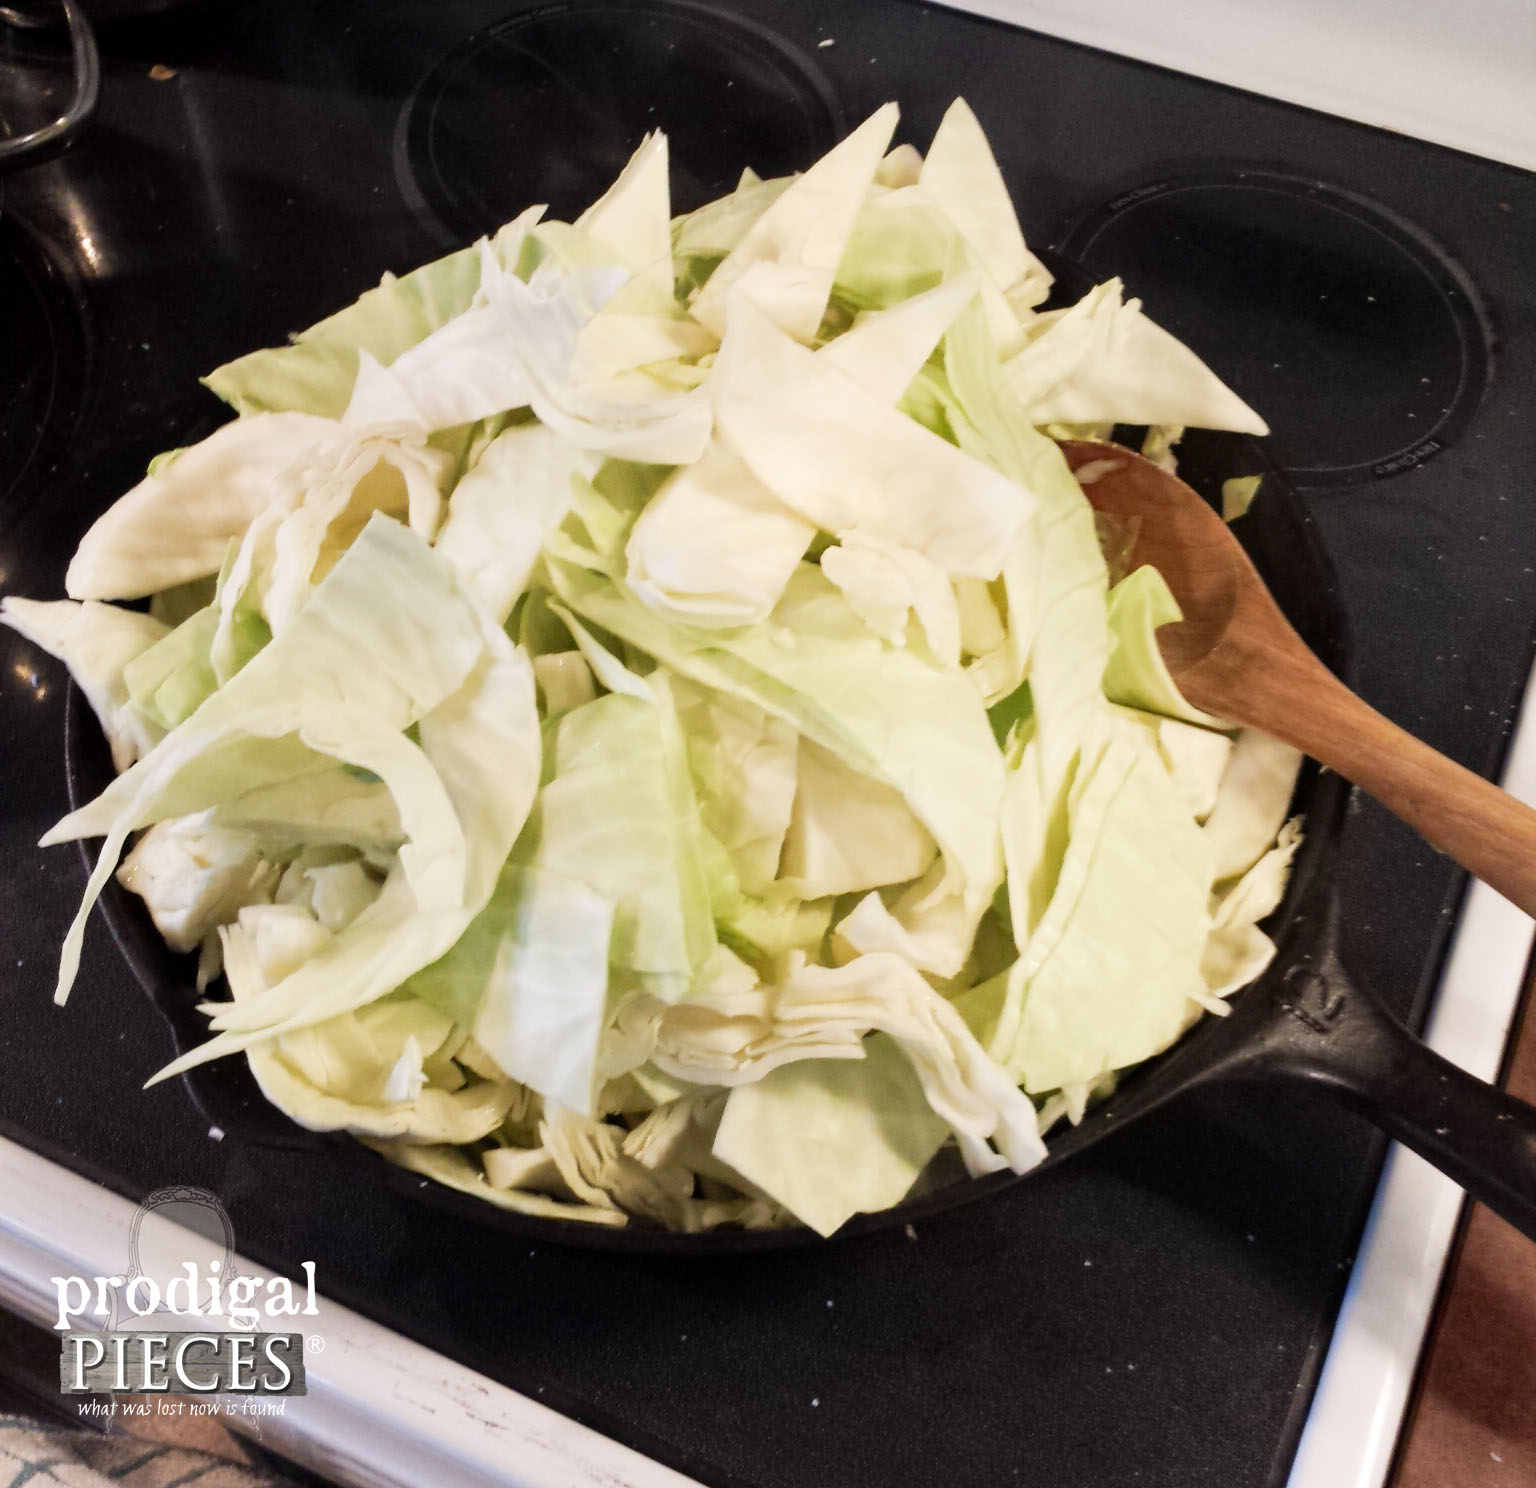 Cooking Cabbage in Cast Iron Skillet for Pizza | Prodigal Pieces | www.prodigalpieces.com